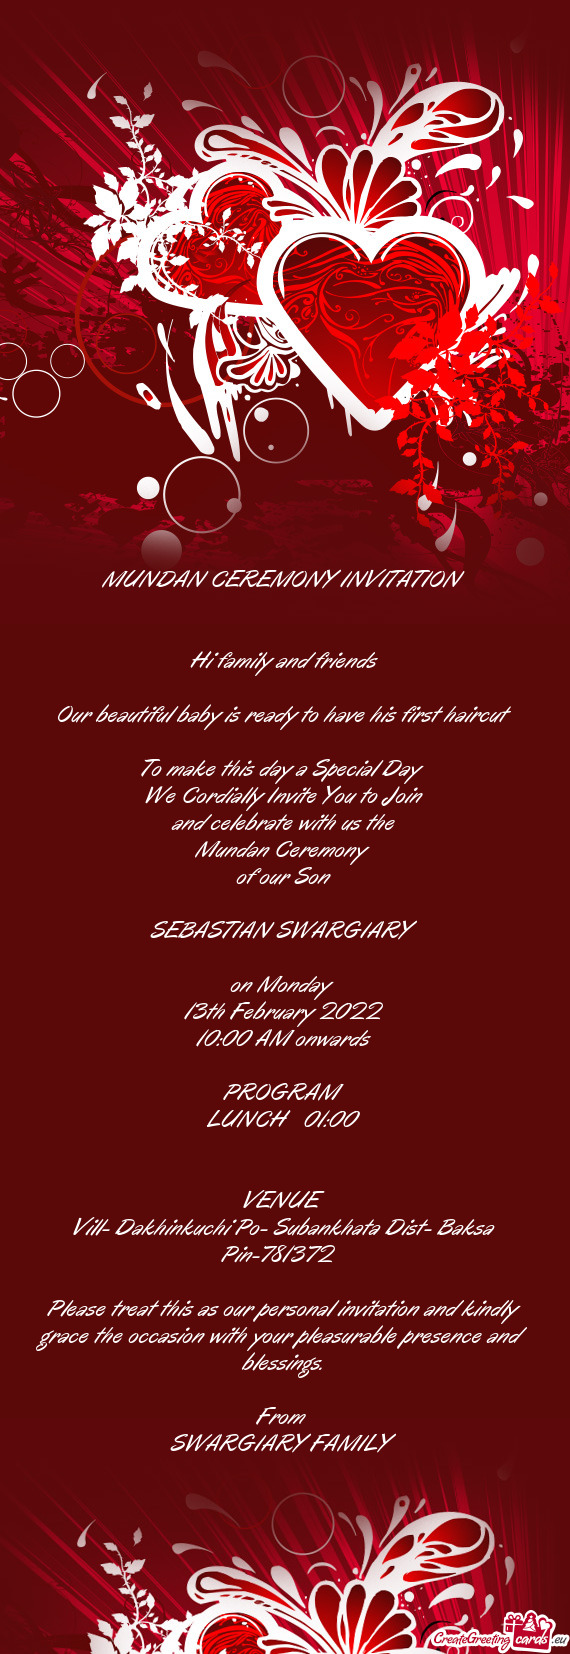 MUNDAN CEREMONY INVITATION
 
 
 Hi family and friends
 
 Our beautiful baby is ready to have his fir